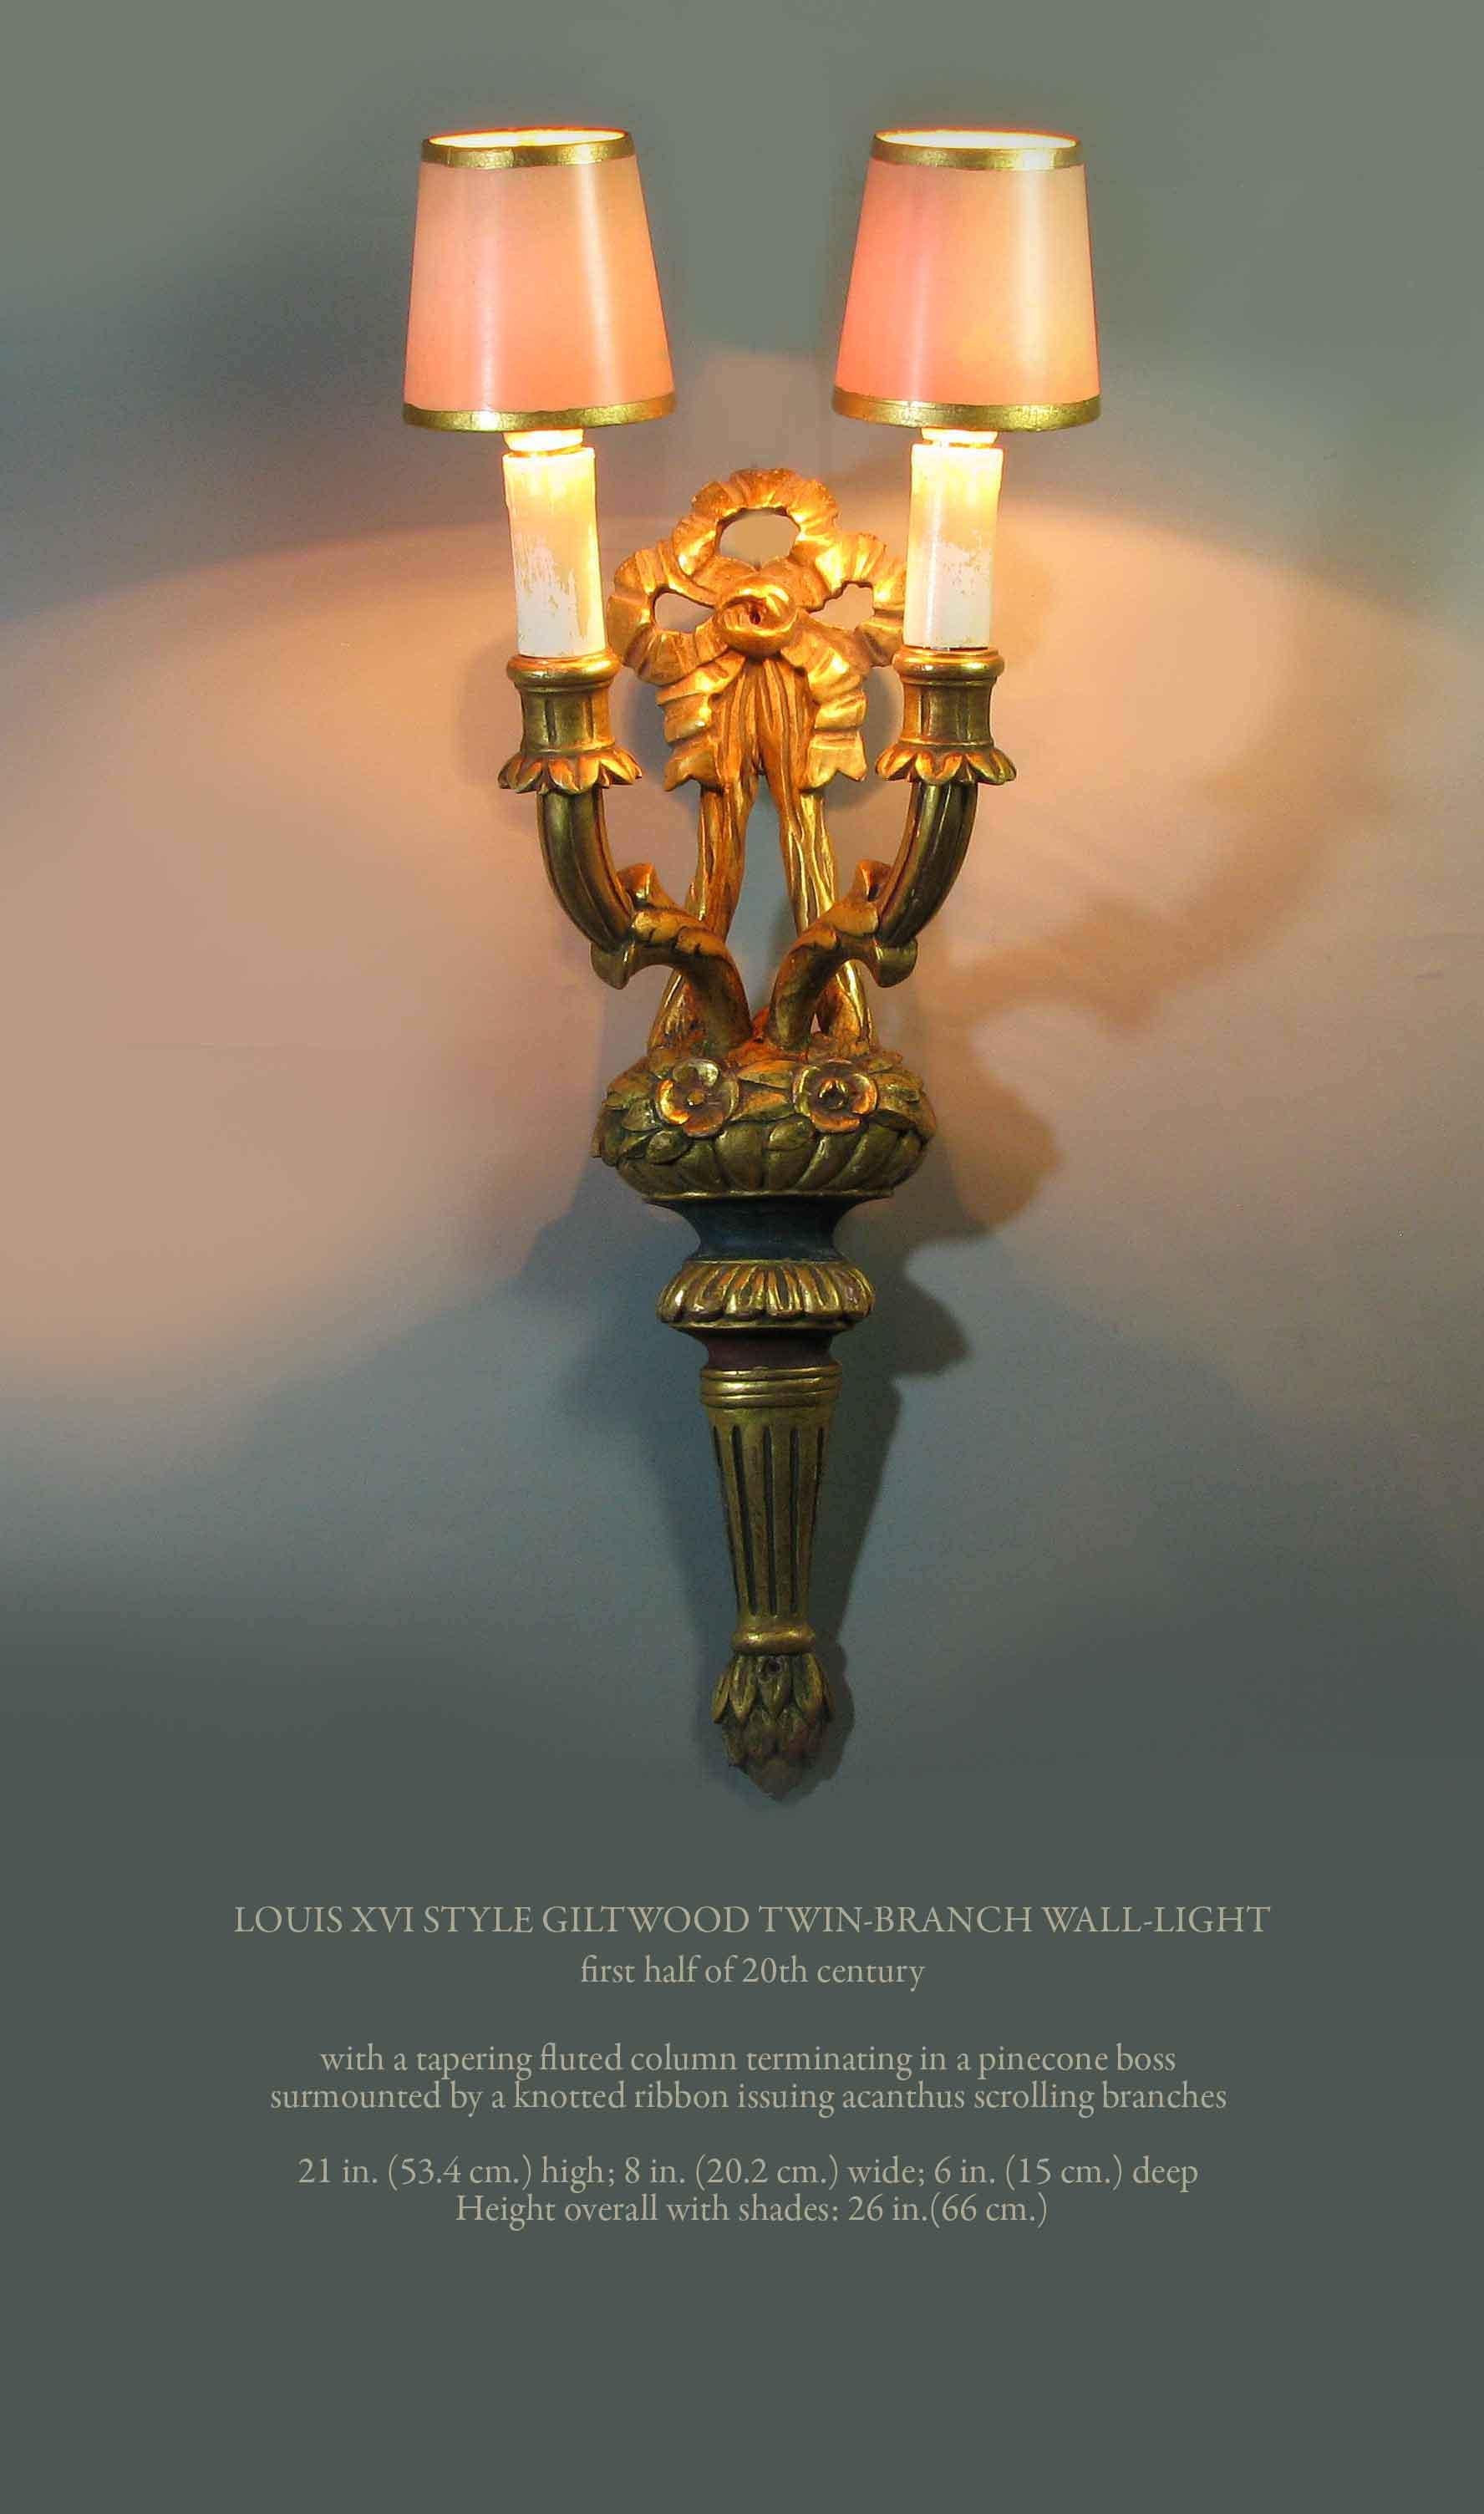 LOUIS XVI STYLE GILTWOOD TWIN-BRANCH WALL-LIGHT
first half of 20th century

With a tapering fluted column terminating in a pinecone boss 
surmounted by a knotted ribbon issuing acanthus scrolling branches.

Measures: 21 in. (53.4 cm.) high.
8